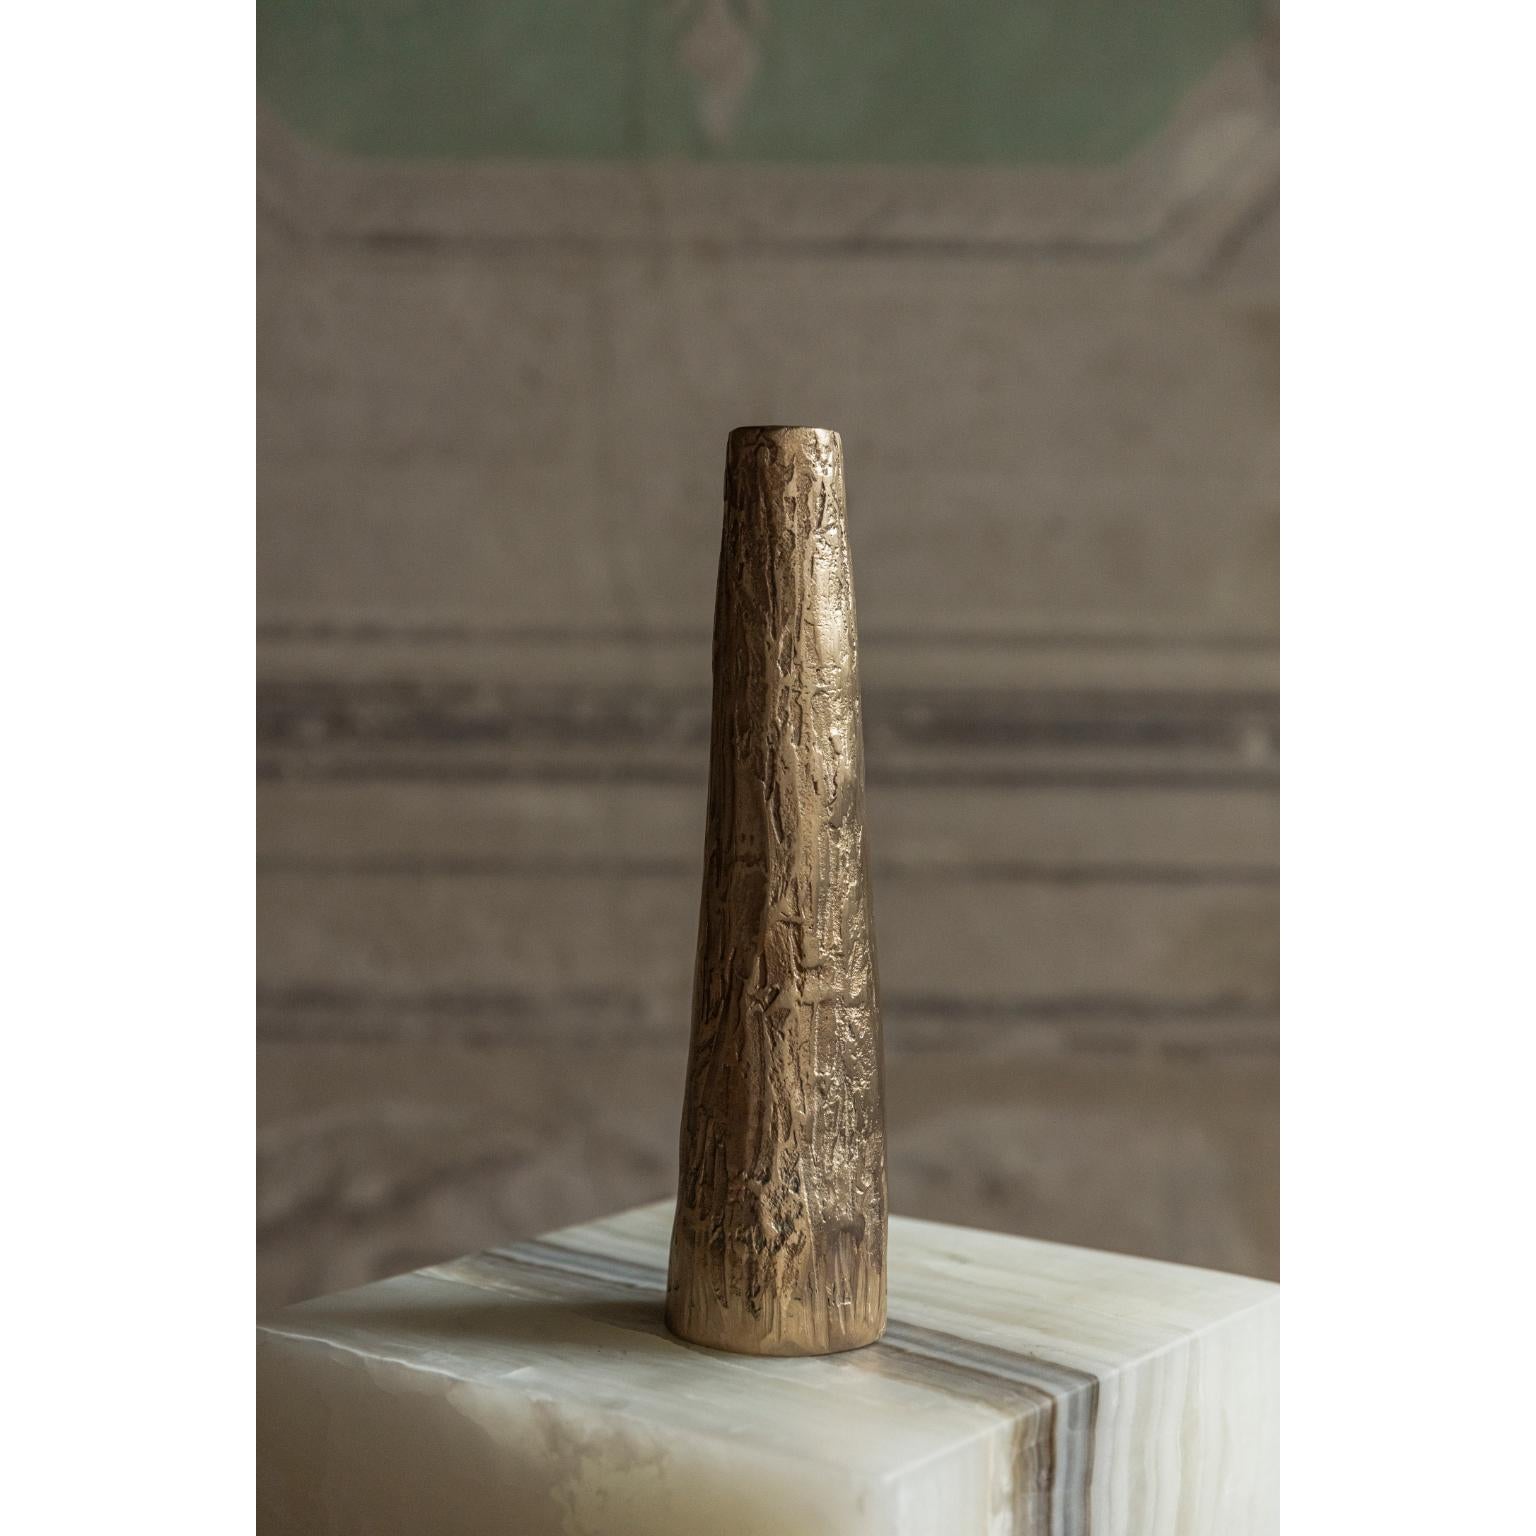 Golden grande candle pillar by Rick Owens
2015
Dimensions: L 7.5 x W 7.5 x H 41 cm
Materials: Bronze
Weight: 3.4 kg
The gold edition is an exclusivity of Galerie Philia

Available in black, gold, and nitrate finish.

Rick Owens is a